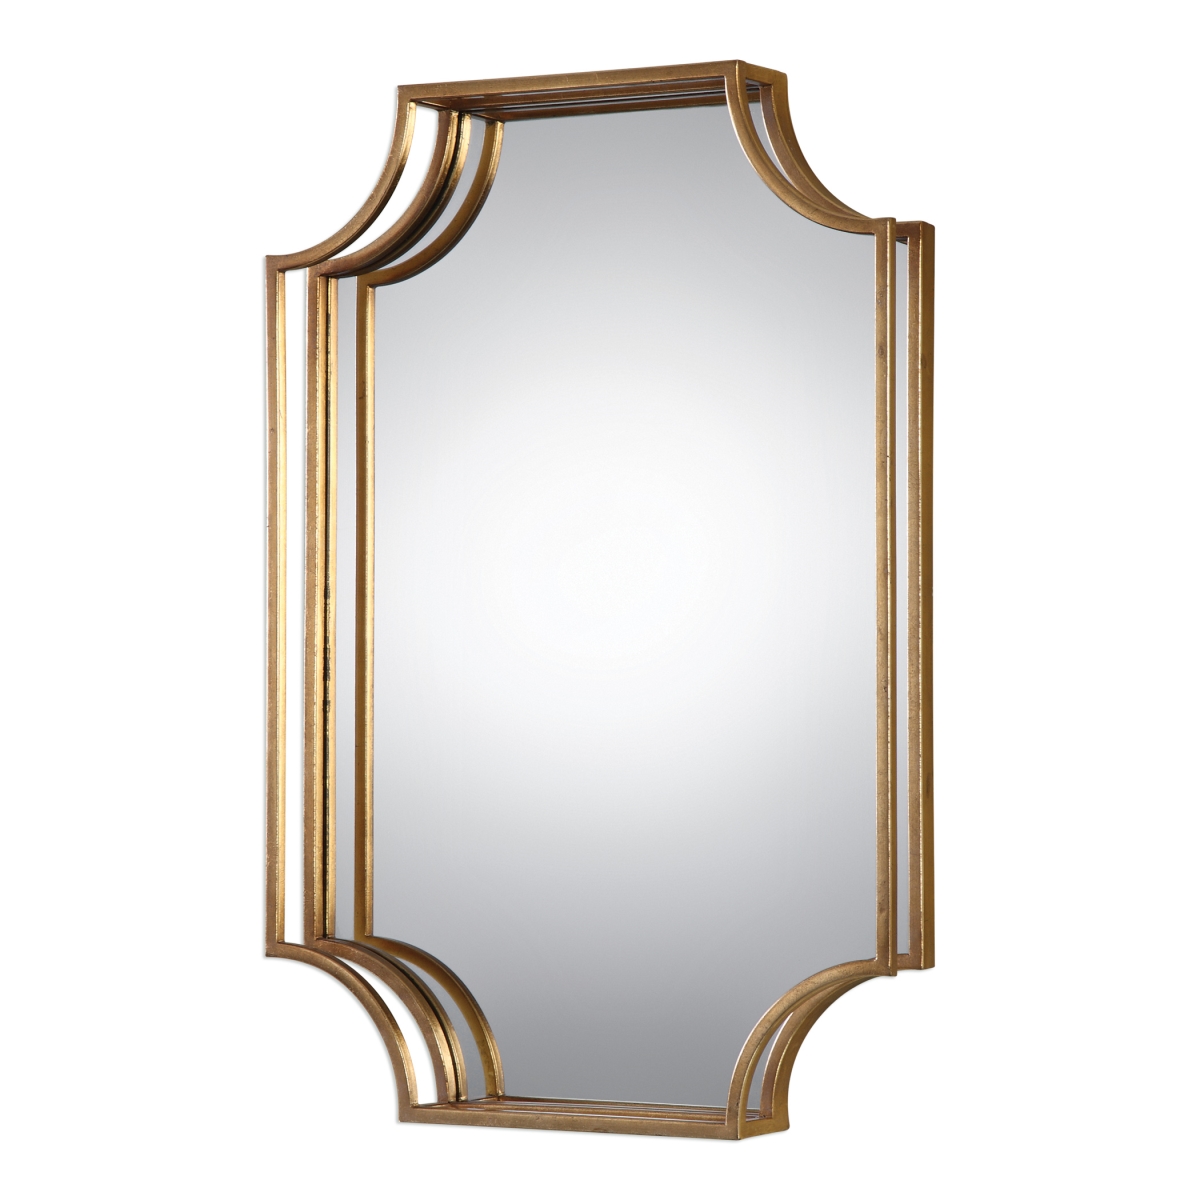 Picture of 212 Main 09123 Lindee Gold Wall Mirror